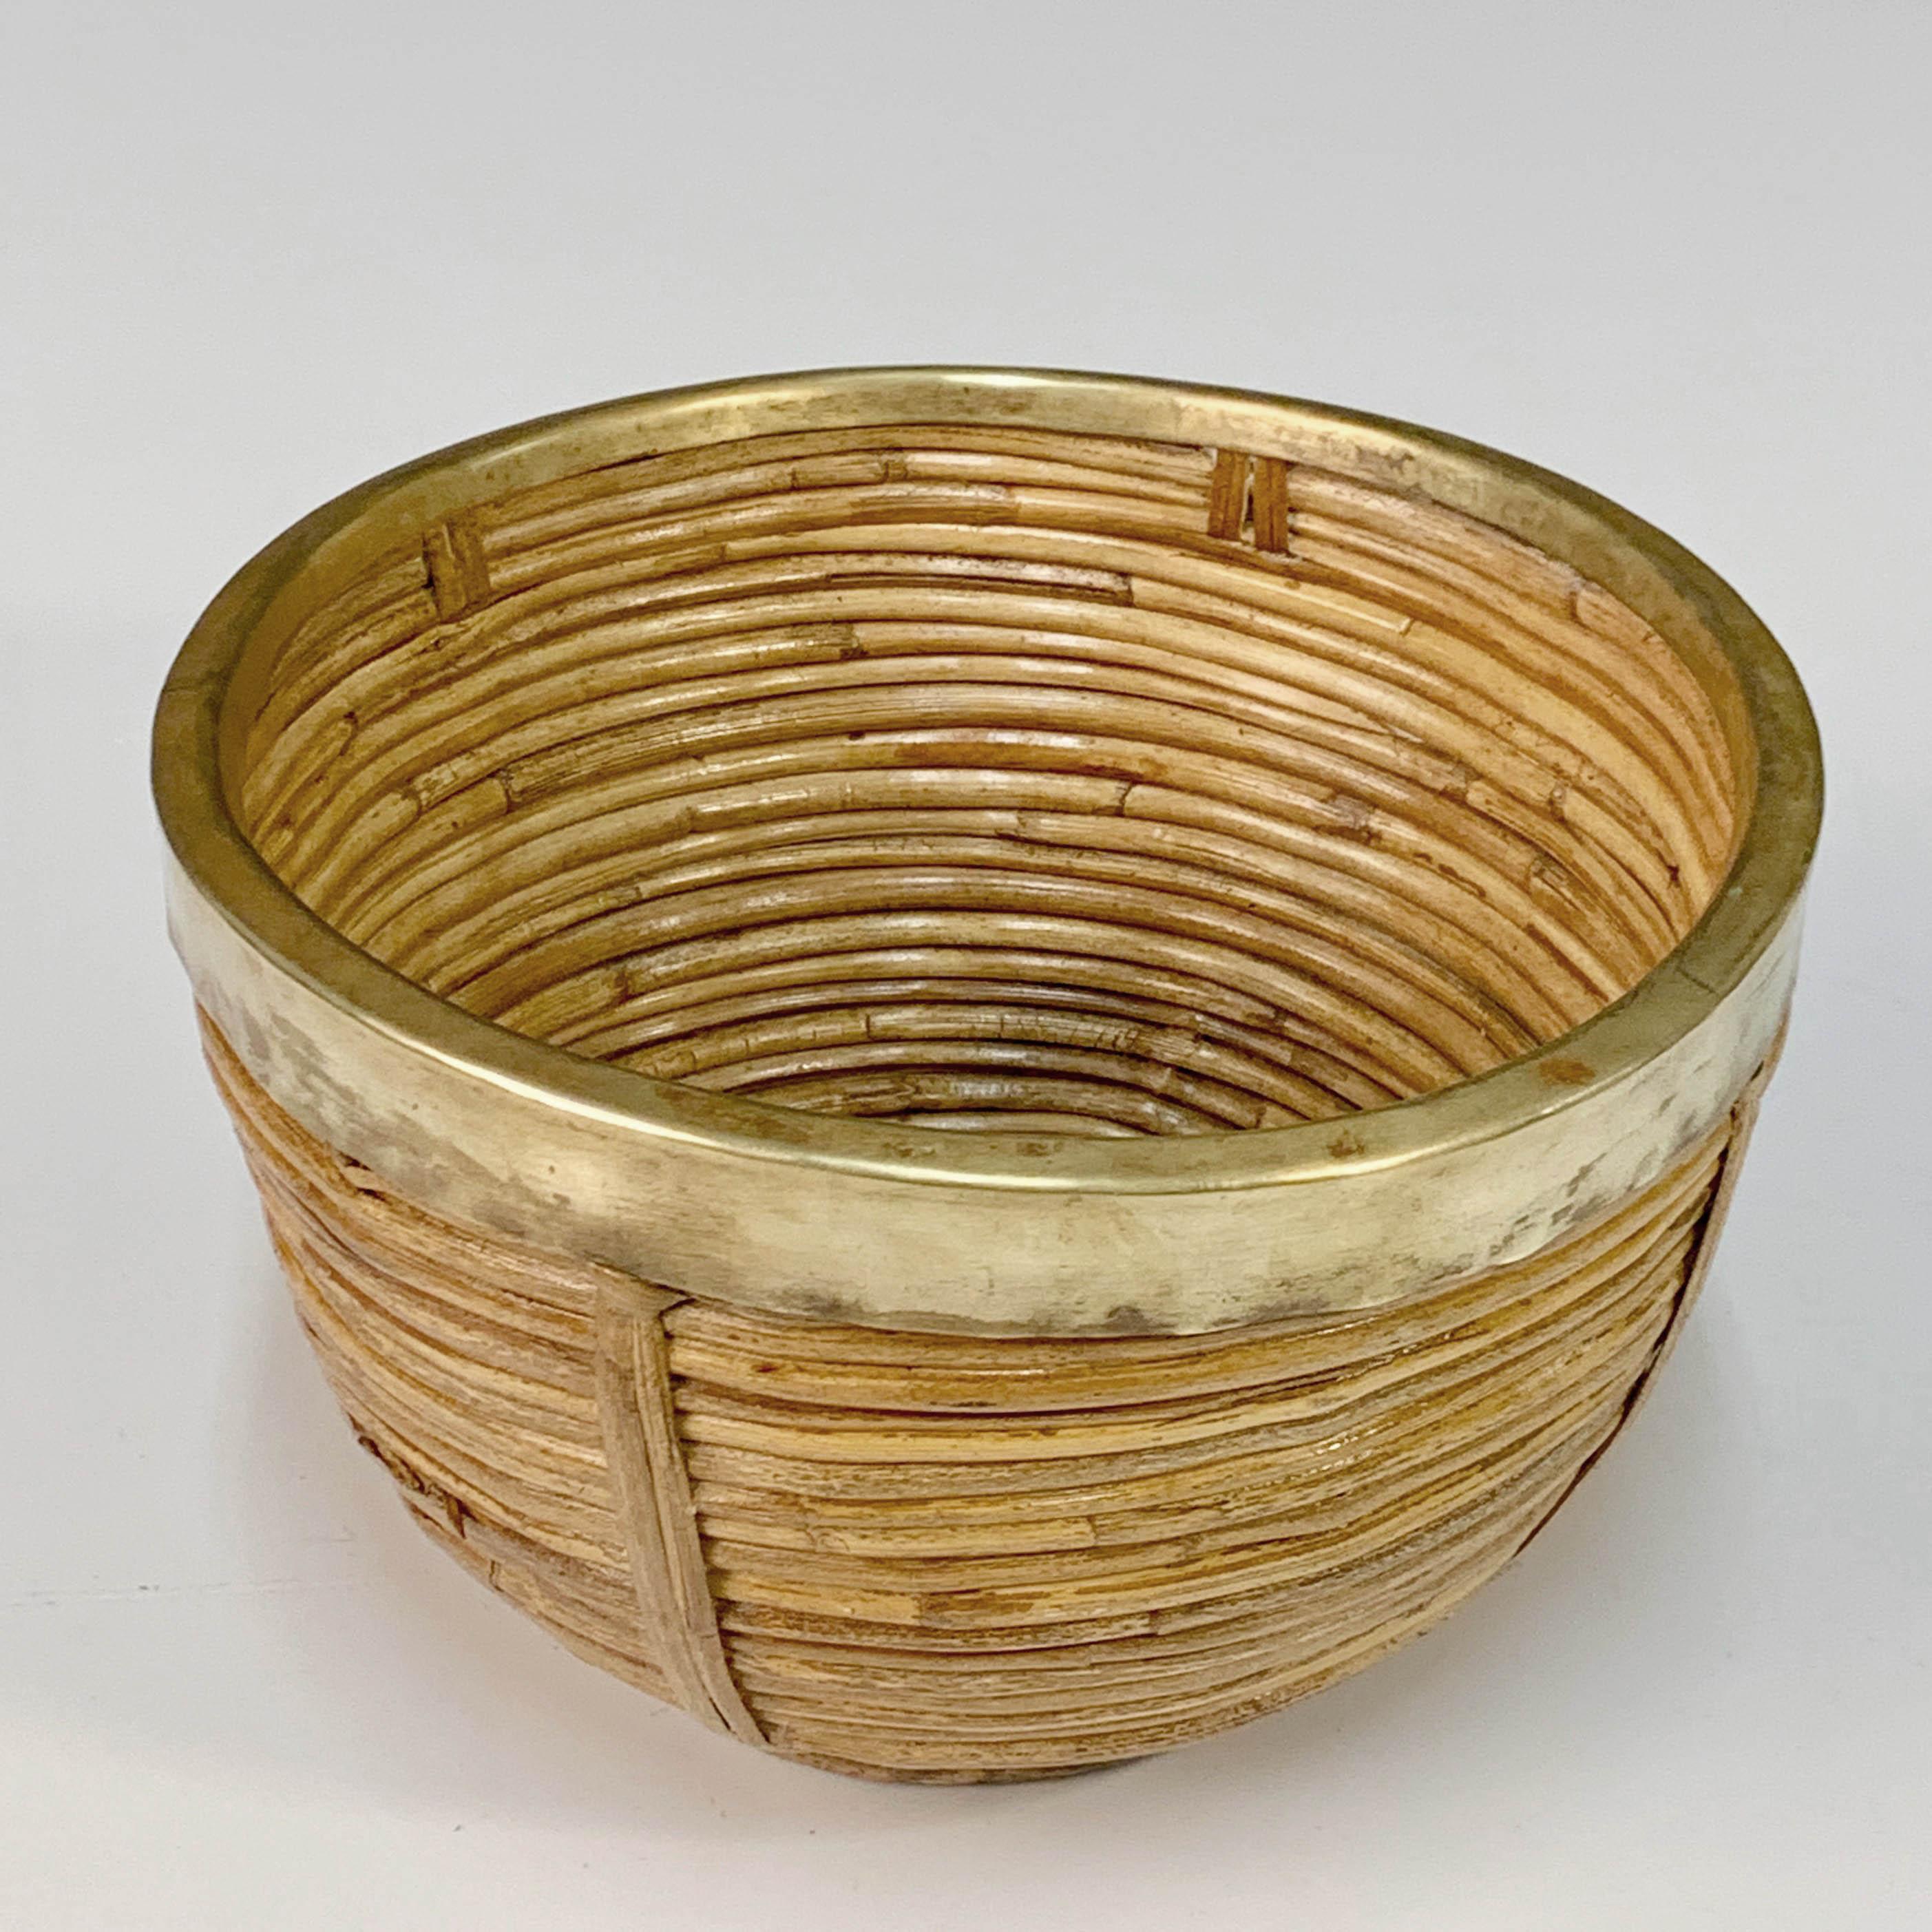 Mid-Century Modern bowl, centrepiece or basket in bamboo and rattan with a brass coating that covers the upper part.

Handcrafted in Italy during the 1970s in the style of Gabriella Crespi. It can be used as a fruit bowl or centerpiece to add an